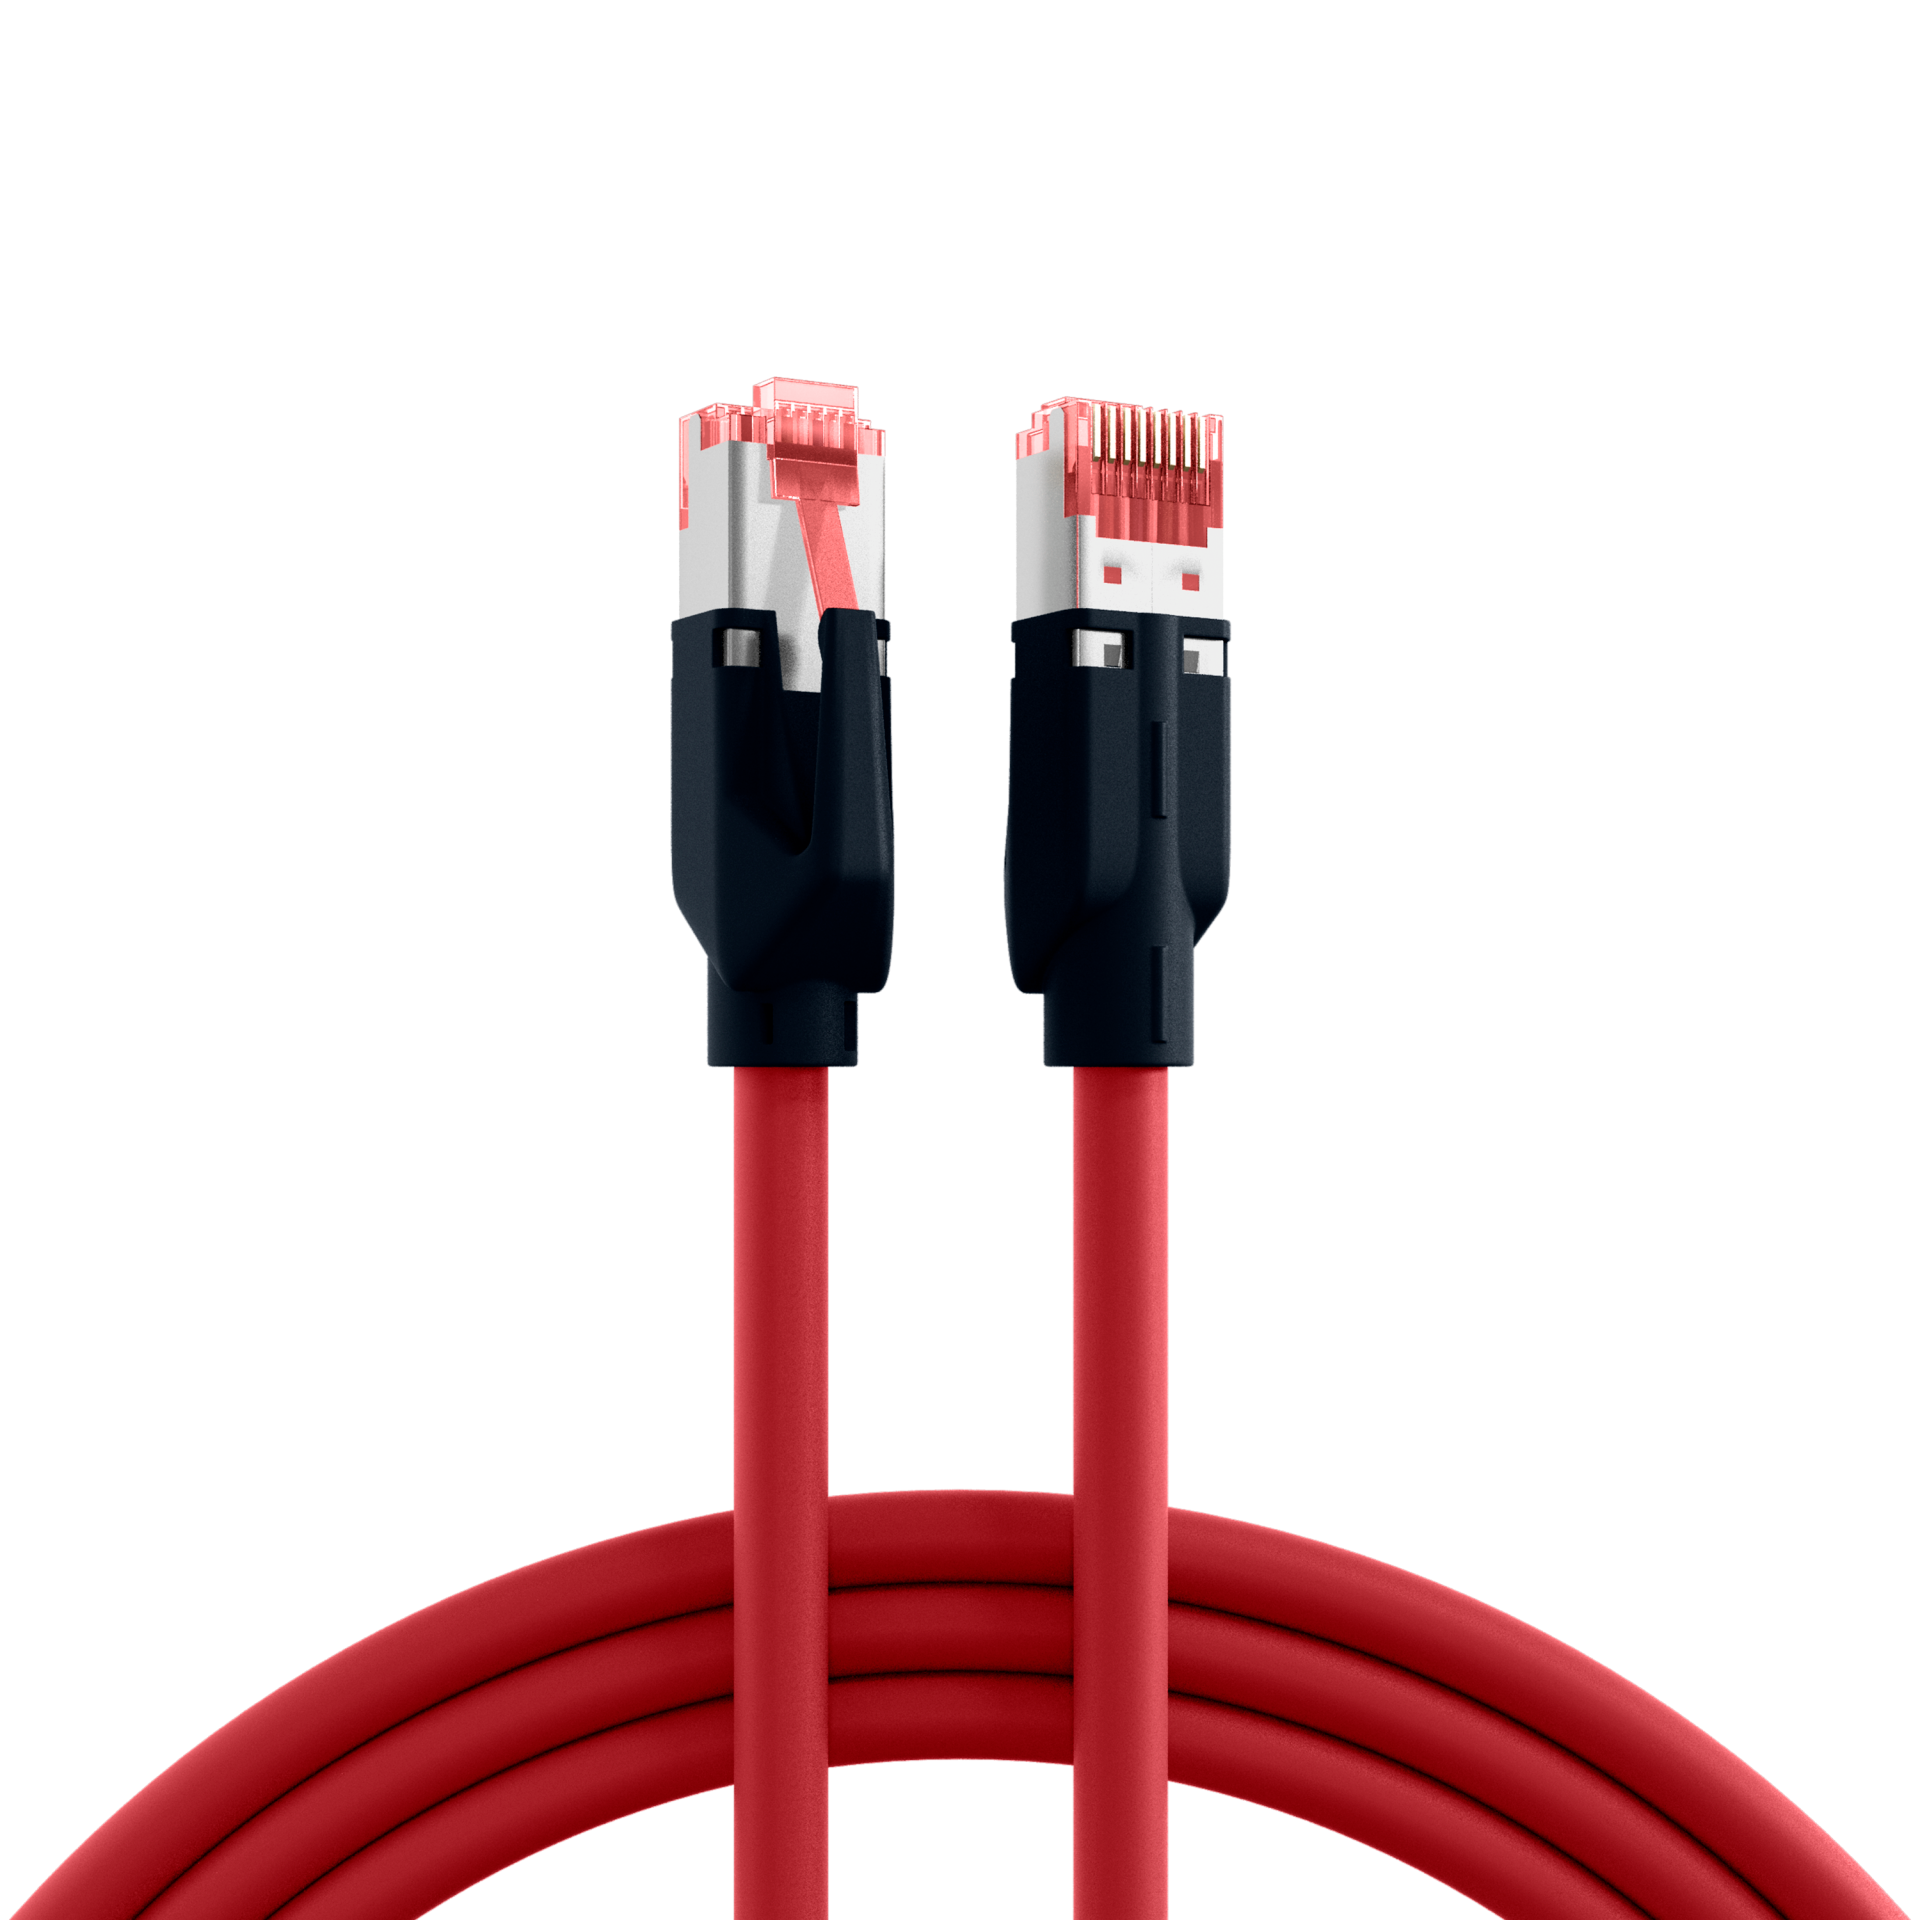 RJ45 Patch Cord Cat.6A S/FTP PUR Draka UC900 TM21 red 1m